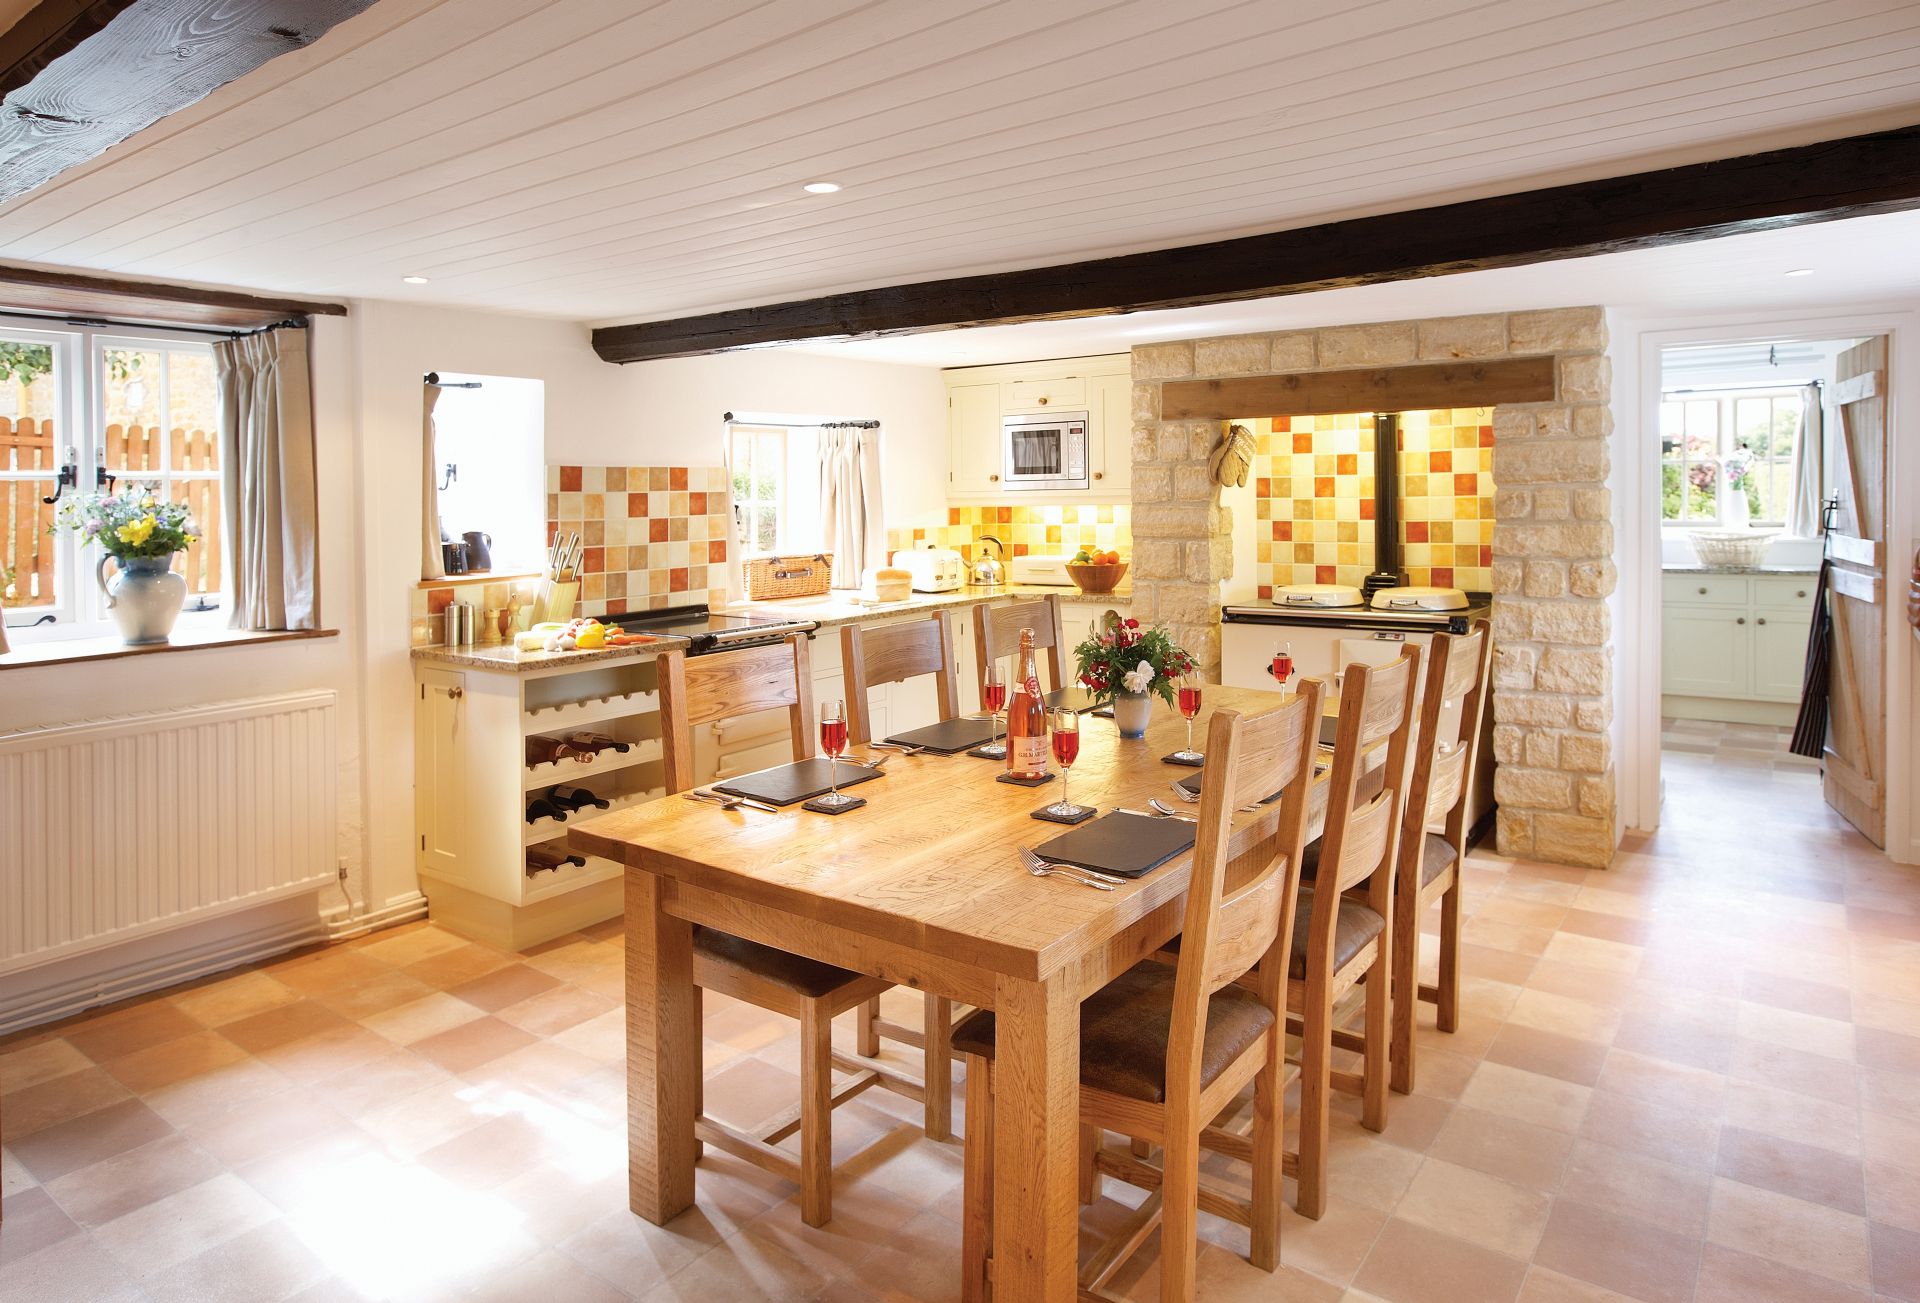 Rose Cottage is located in Bridport and surrounding villages